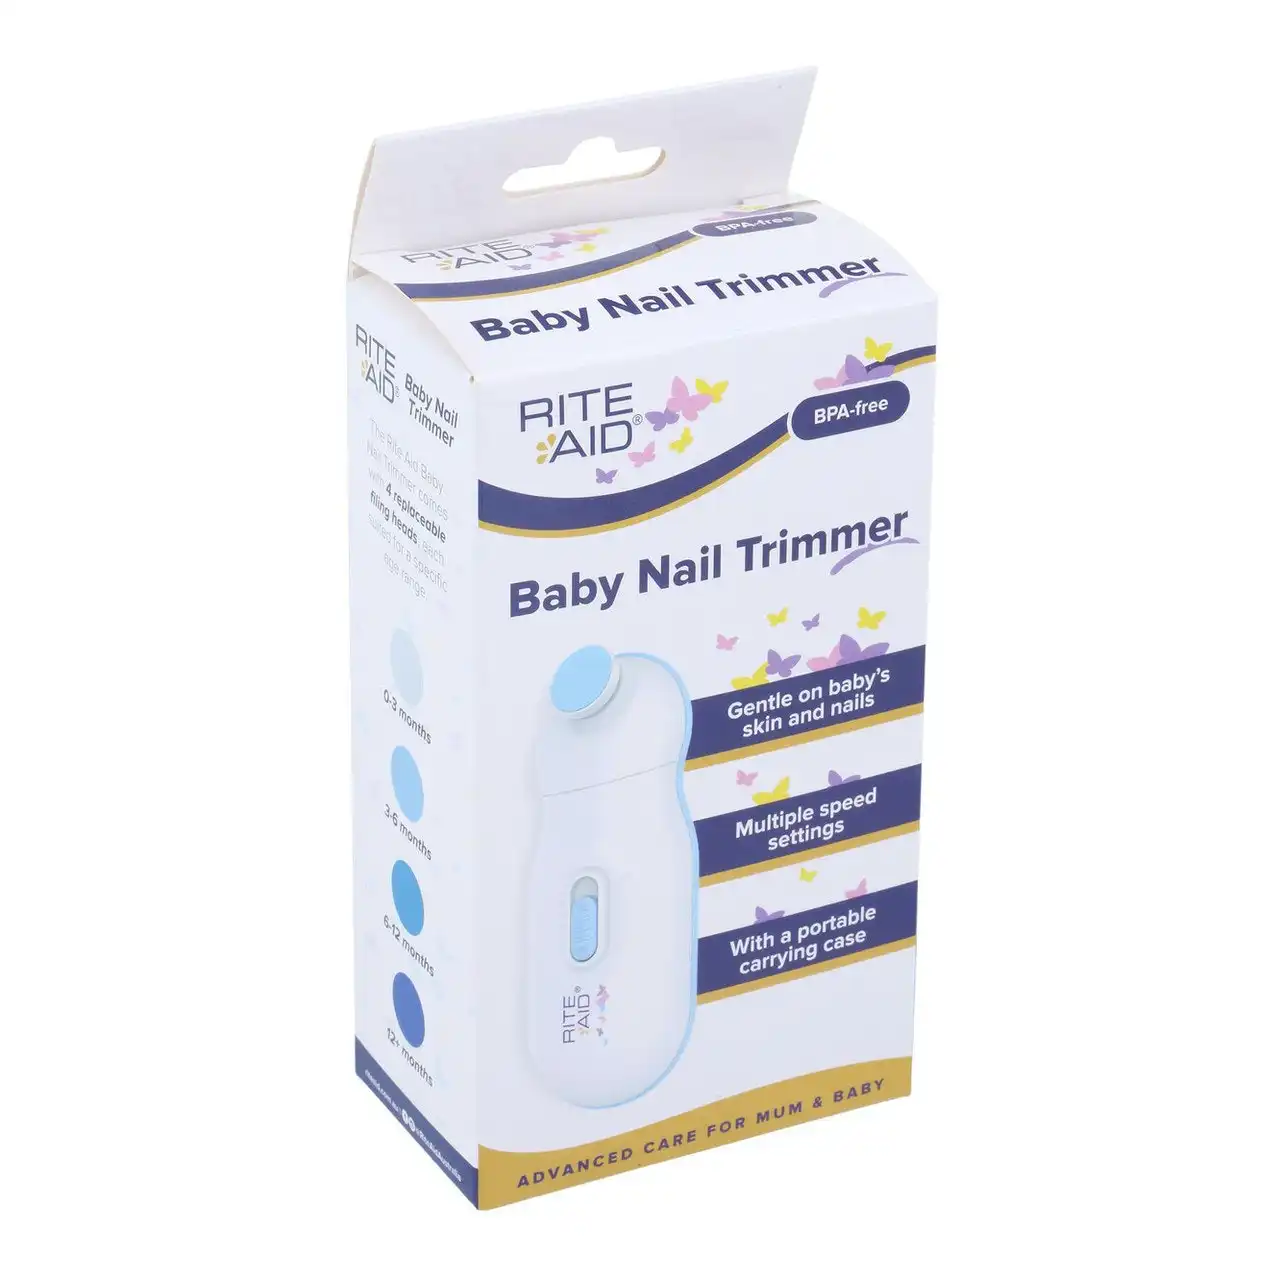 Baby Nail Trimmer